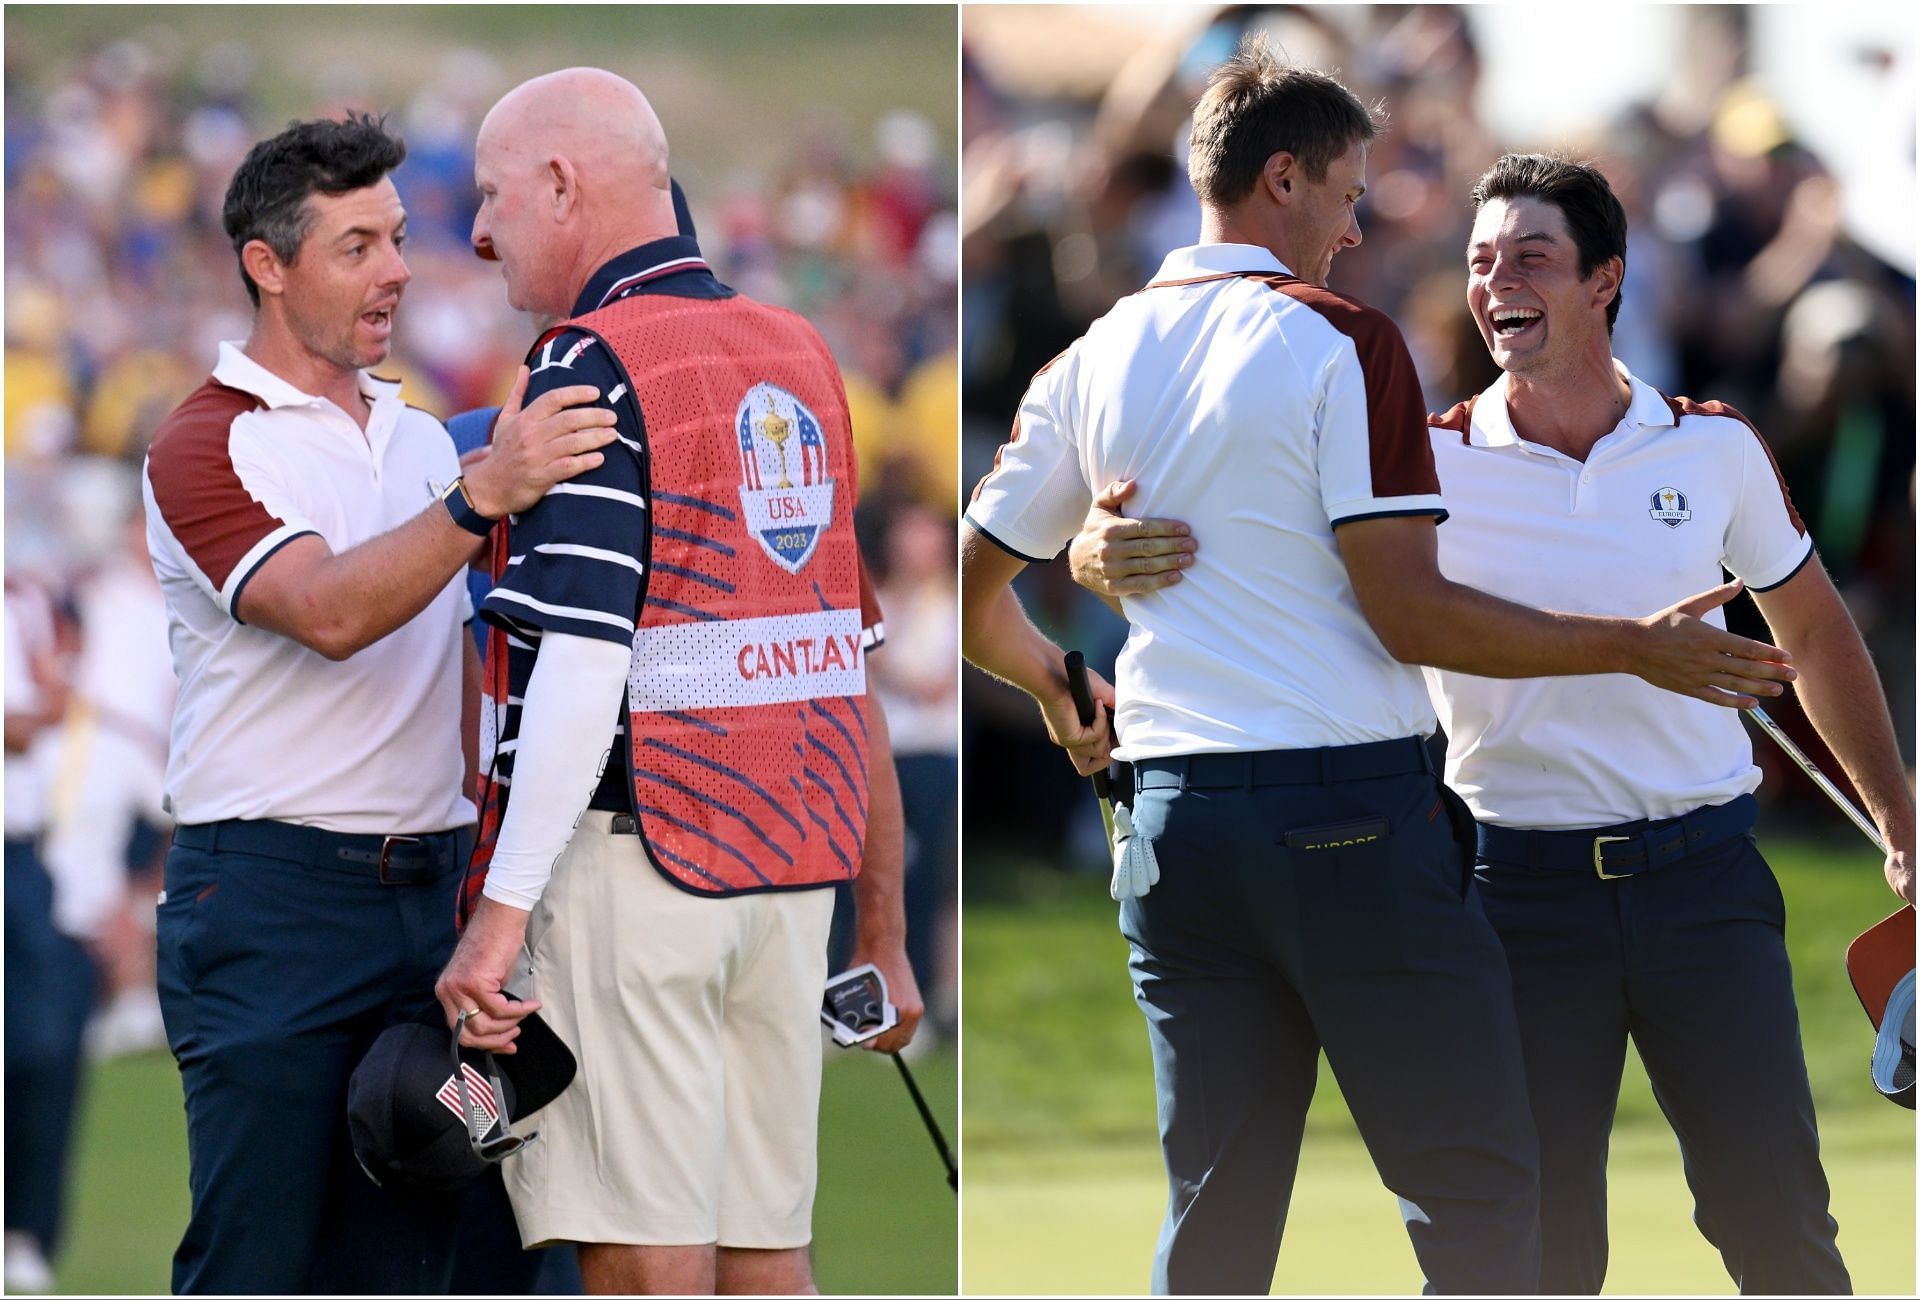 Rory McIlroy and Joe LaCava and Ludvig Aberg and Viktor Hovland at the Saturday